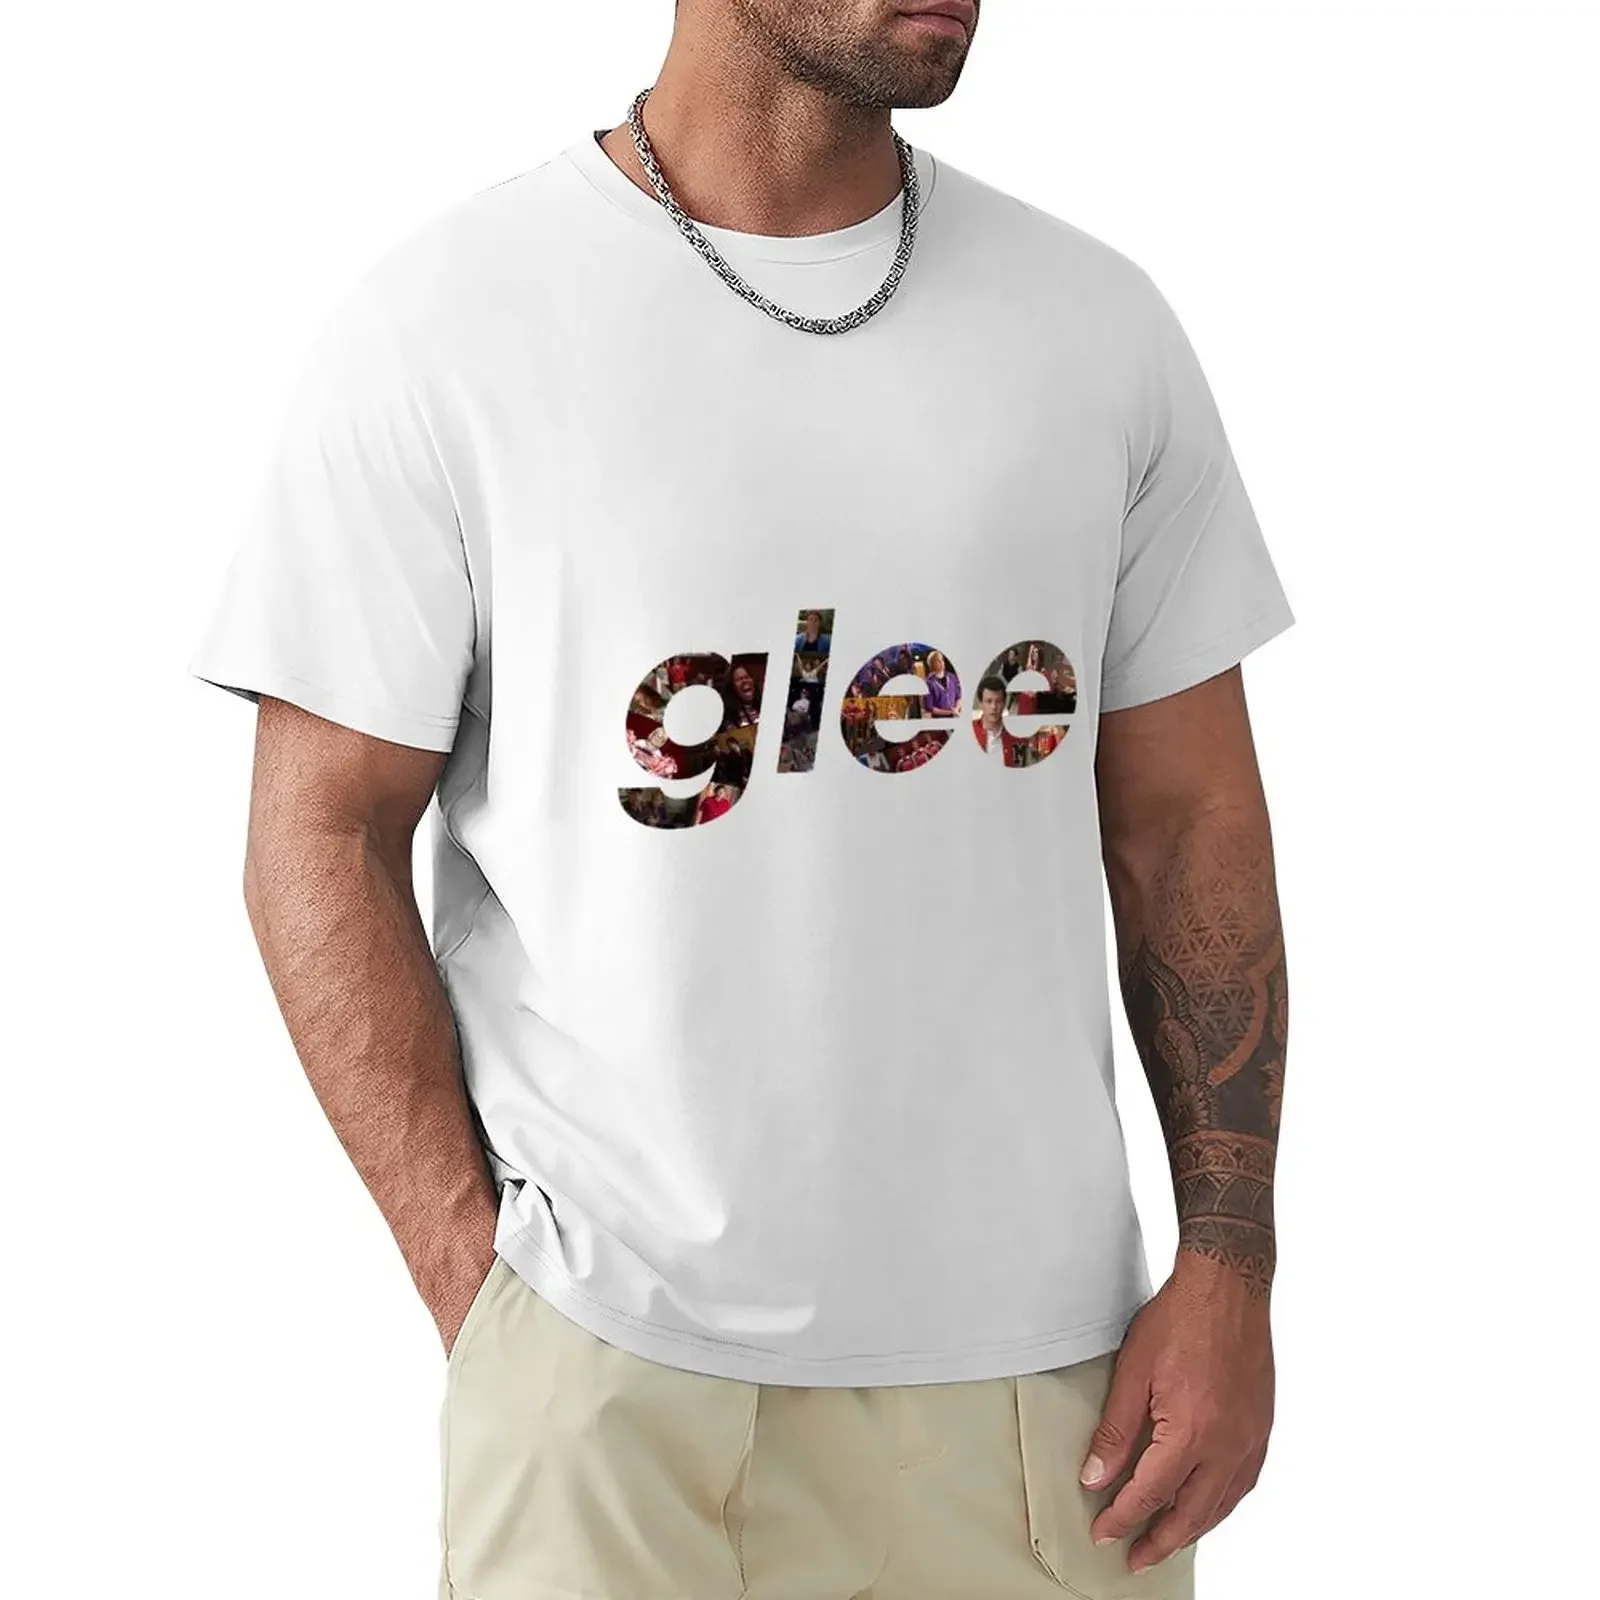 

Glee Characters T-Shirt tops quick drying mens champion t shirts summer tops plus sizes anime clothes workout shirts for men